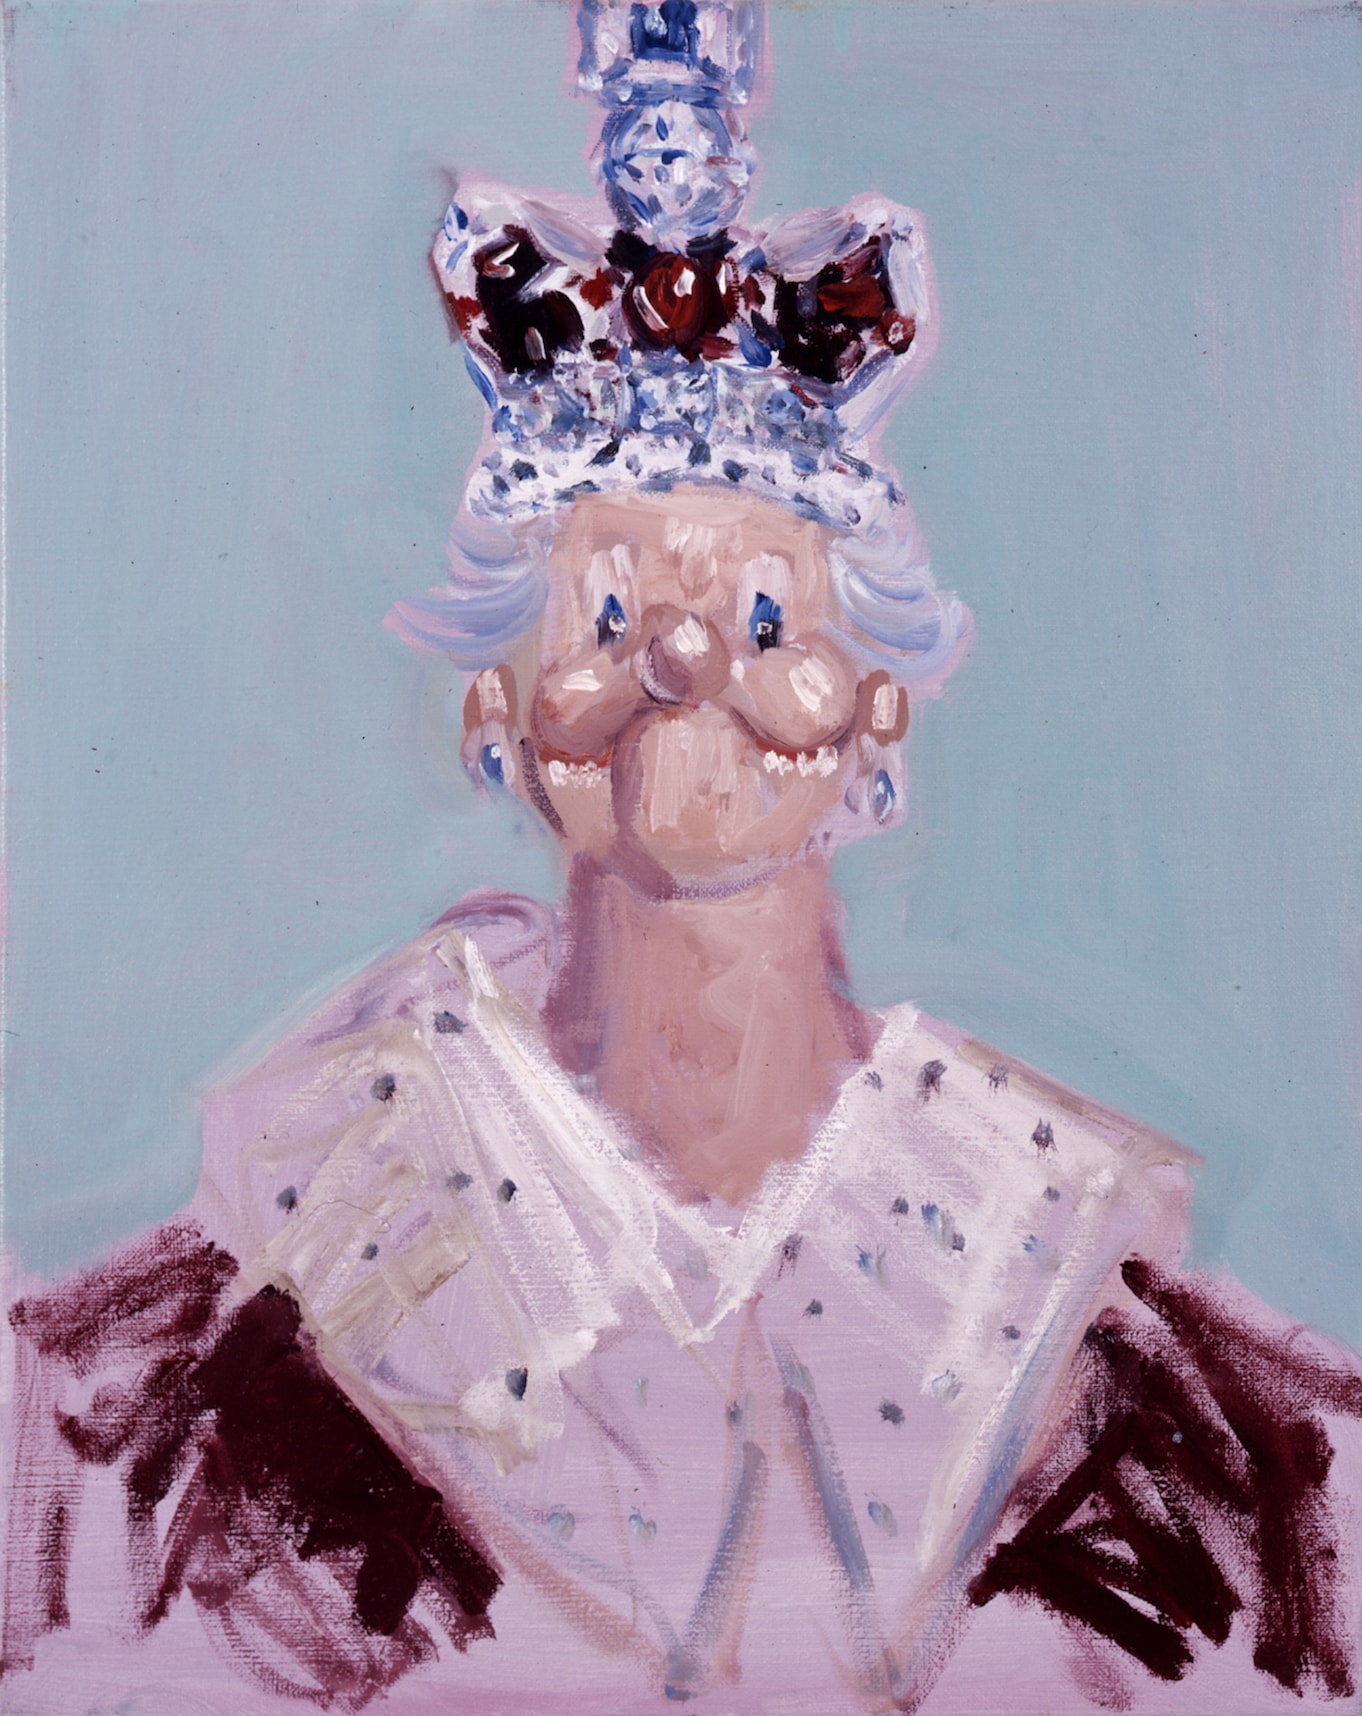 The Wick - George Condo, Dreams and Nightmares of the Queen, 2006